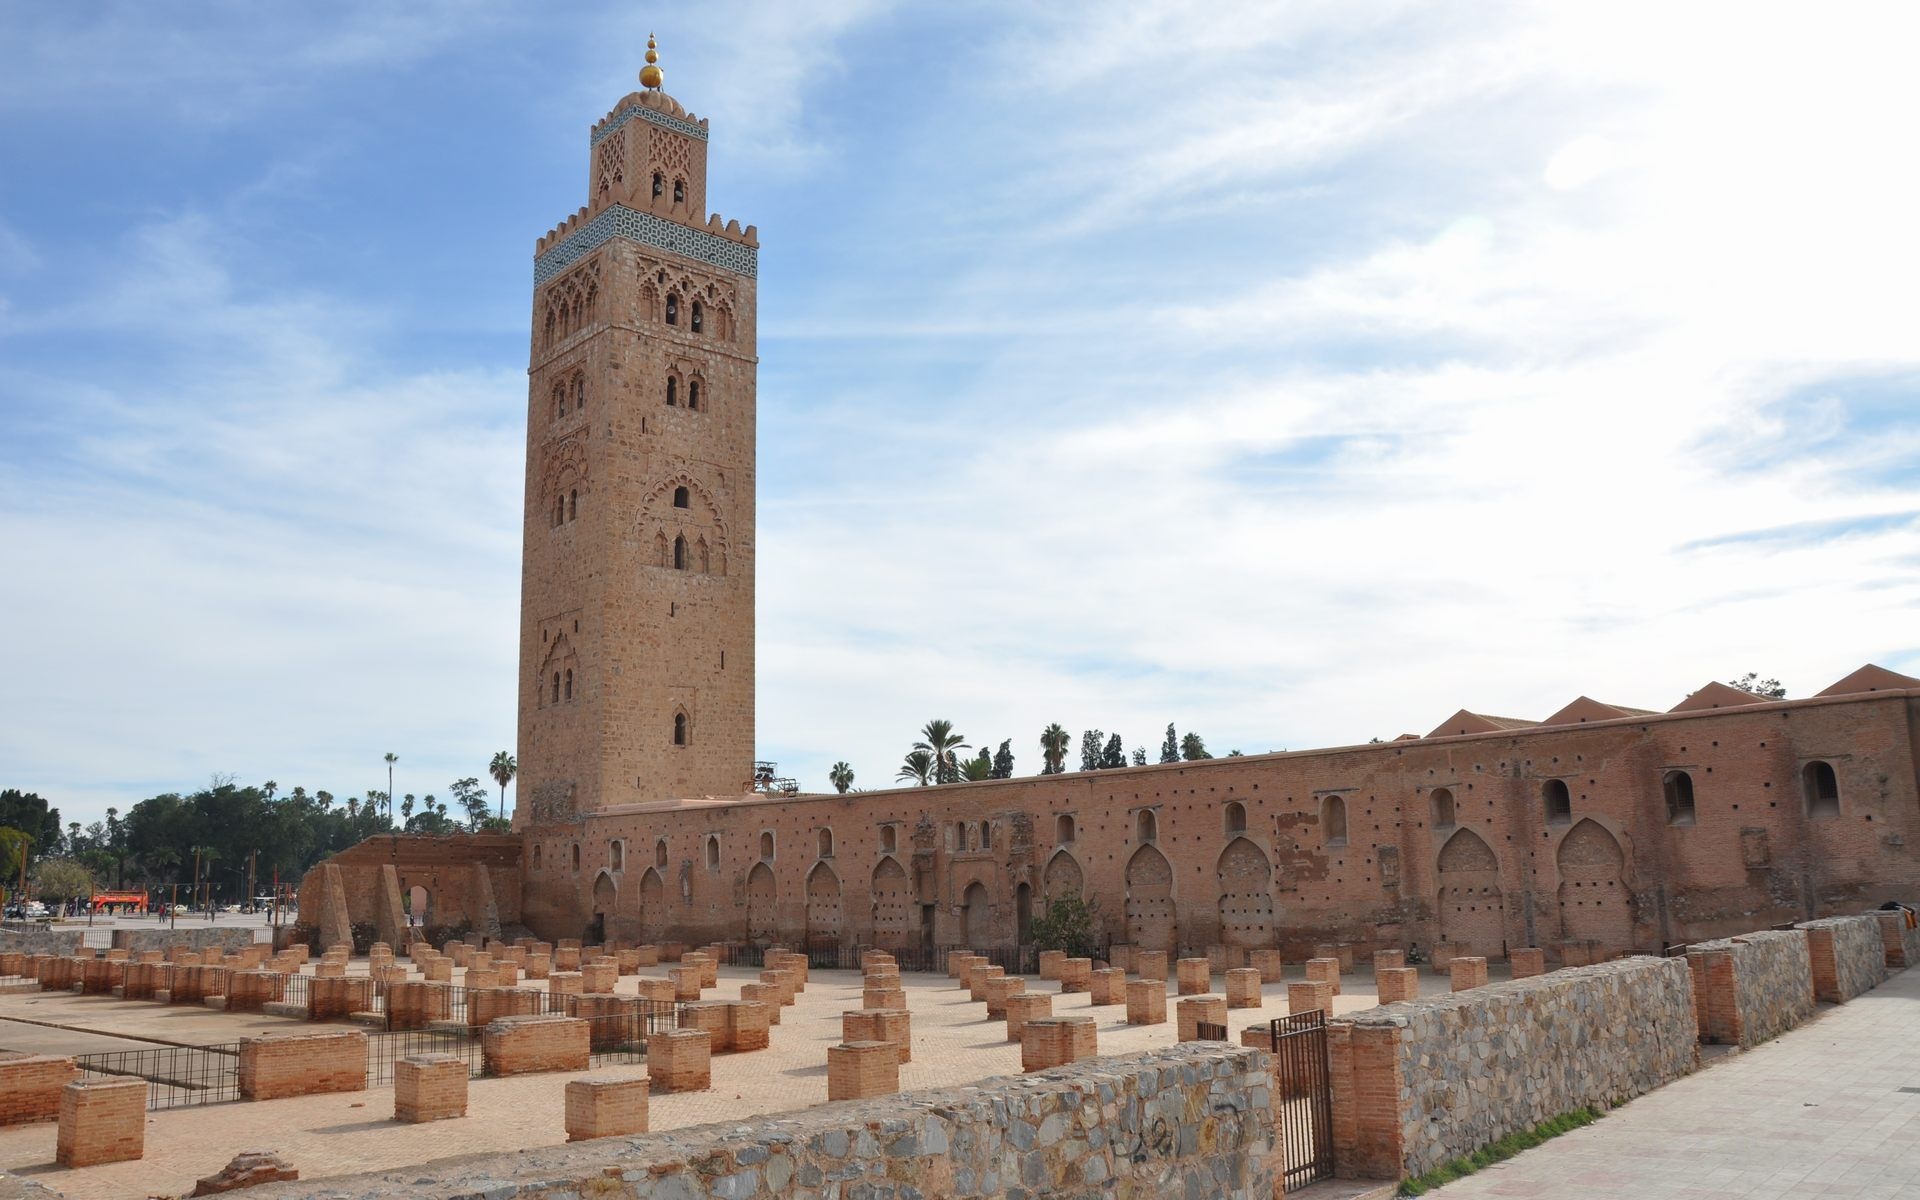 Onezeal HD wallpapers, Mobile and tablet bliss, Widescreen beauty, Morocco's allure, 1920x1200 HD Desktop